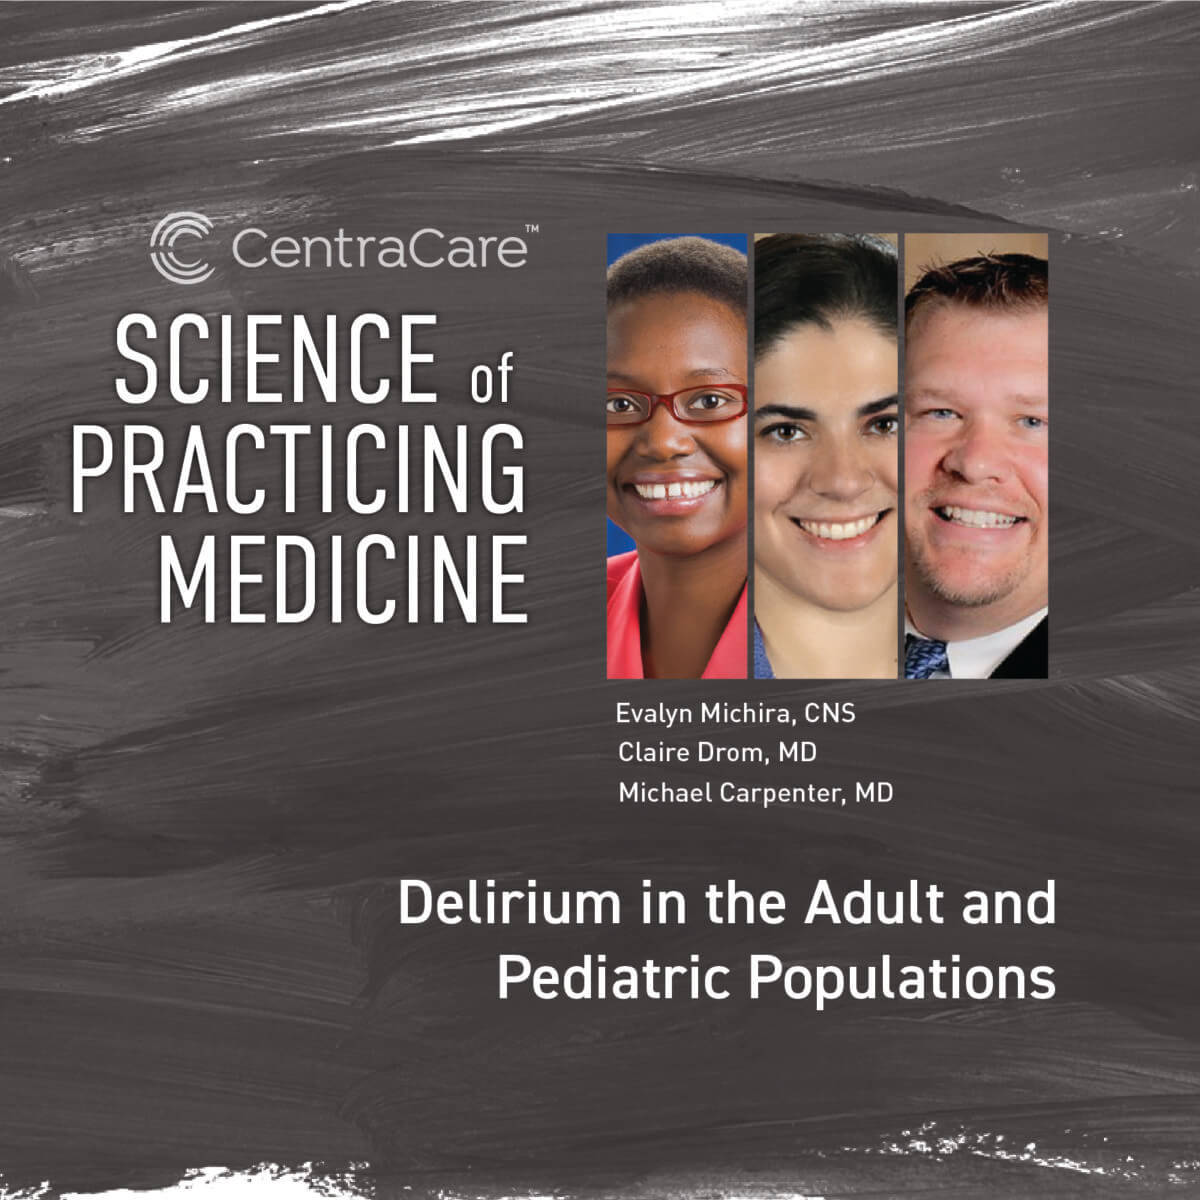 Podcast cover for the Science of Practicing Medicine Episode 4 on Delirium